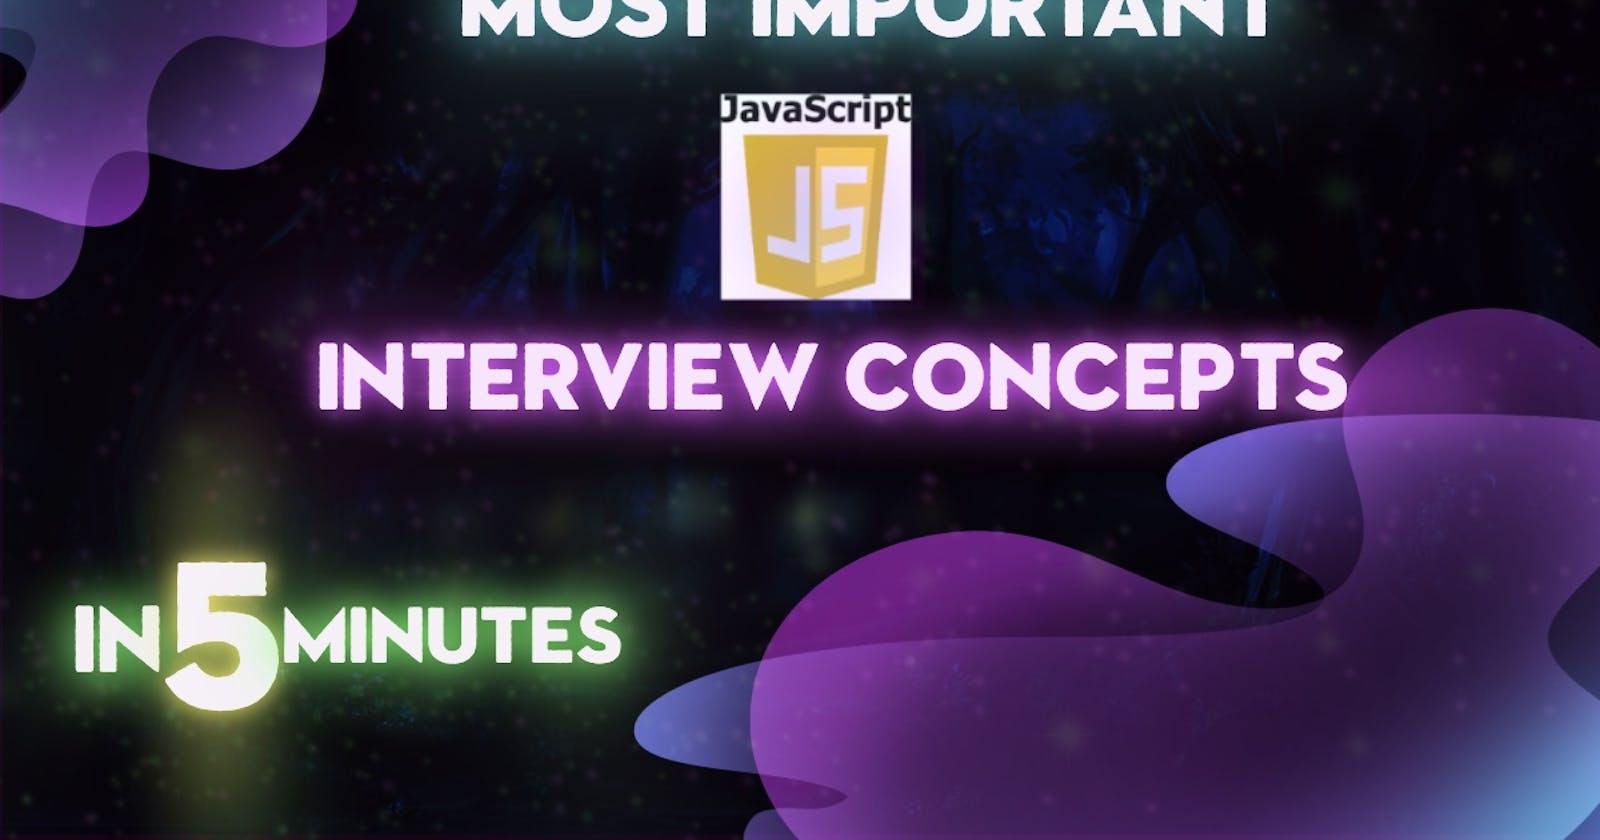 Understanding the Most Important JavaScript Interview Concepts in Five Minutes